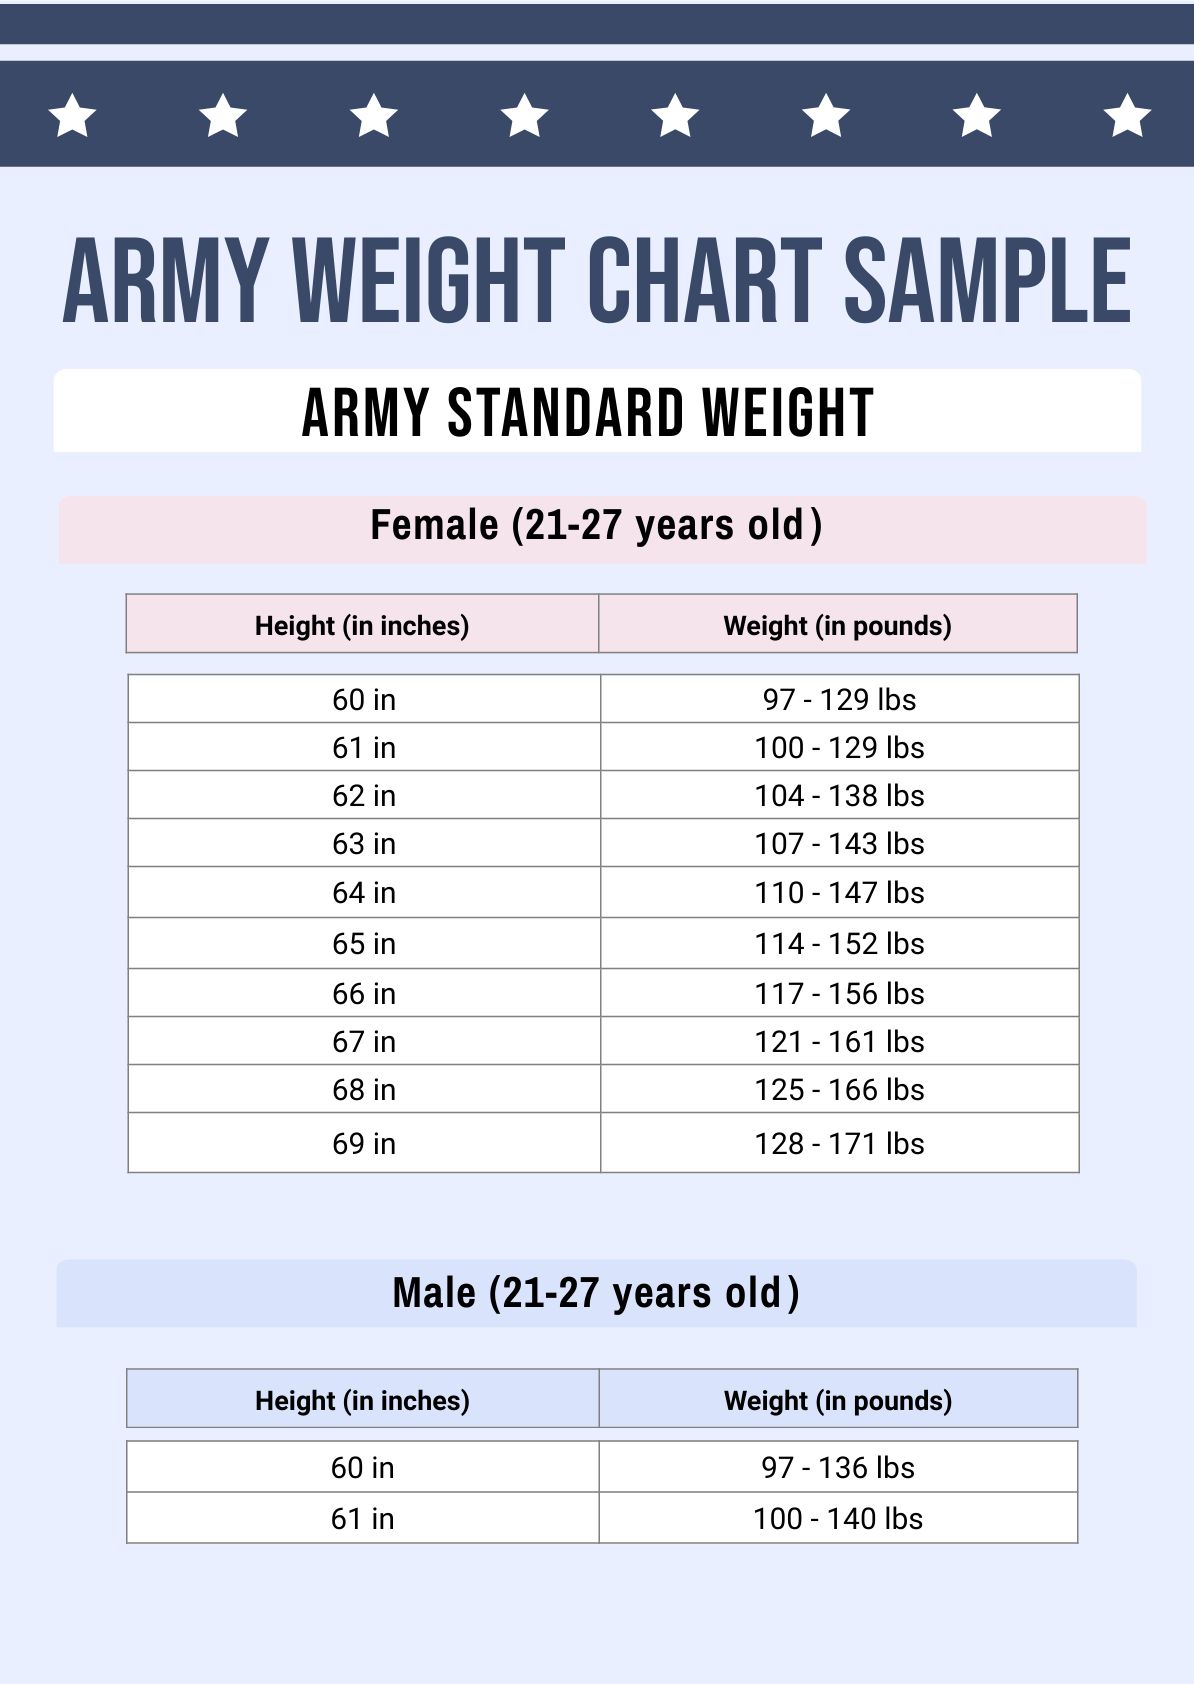 Army Weight Chart Sample